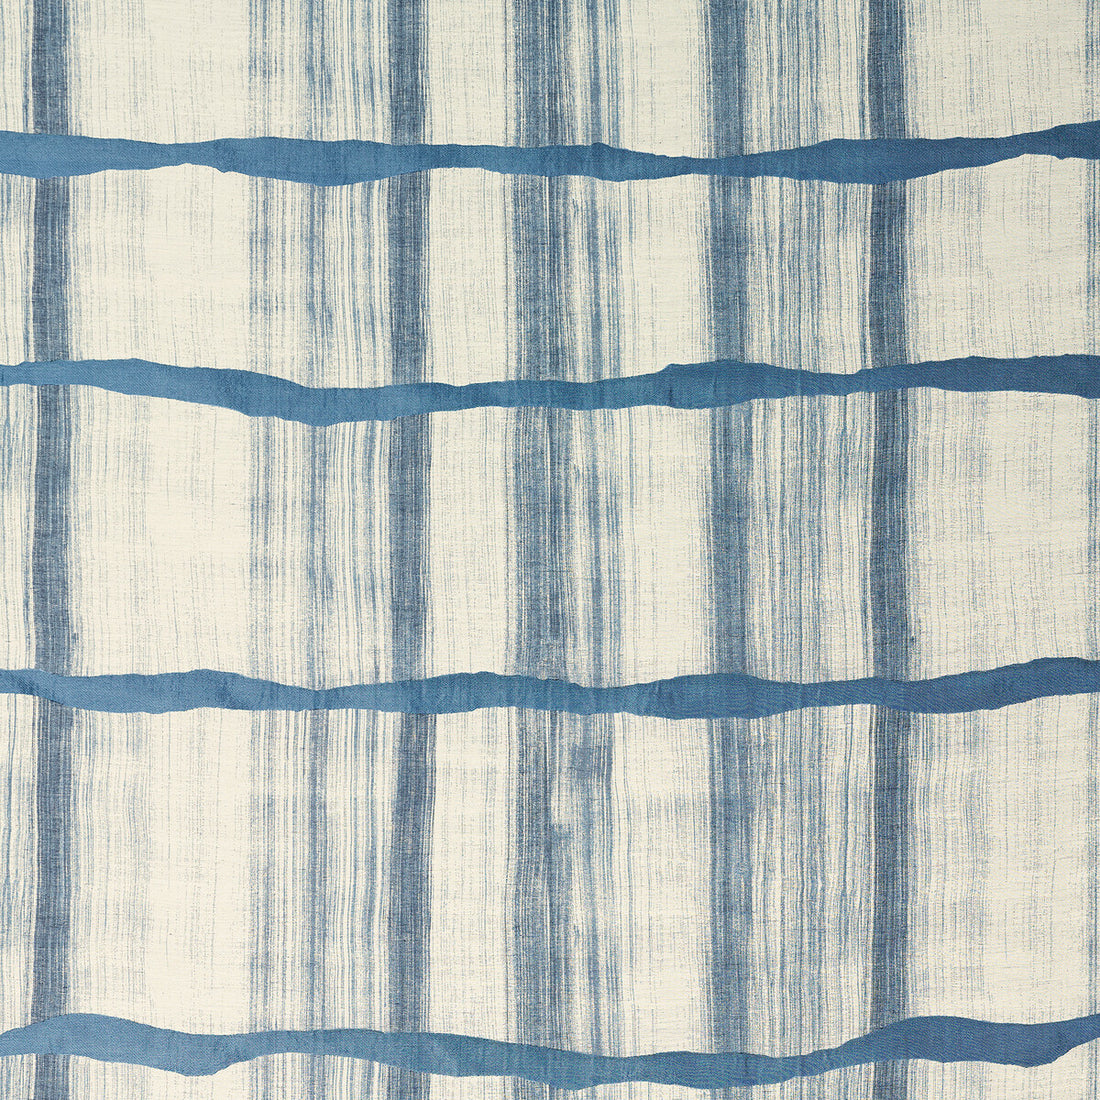 Latitude fabric in indigo/dresden color - pattern ED85213.1.0 - by Threads in the Variation collection